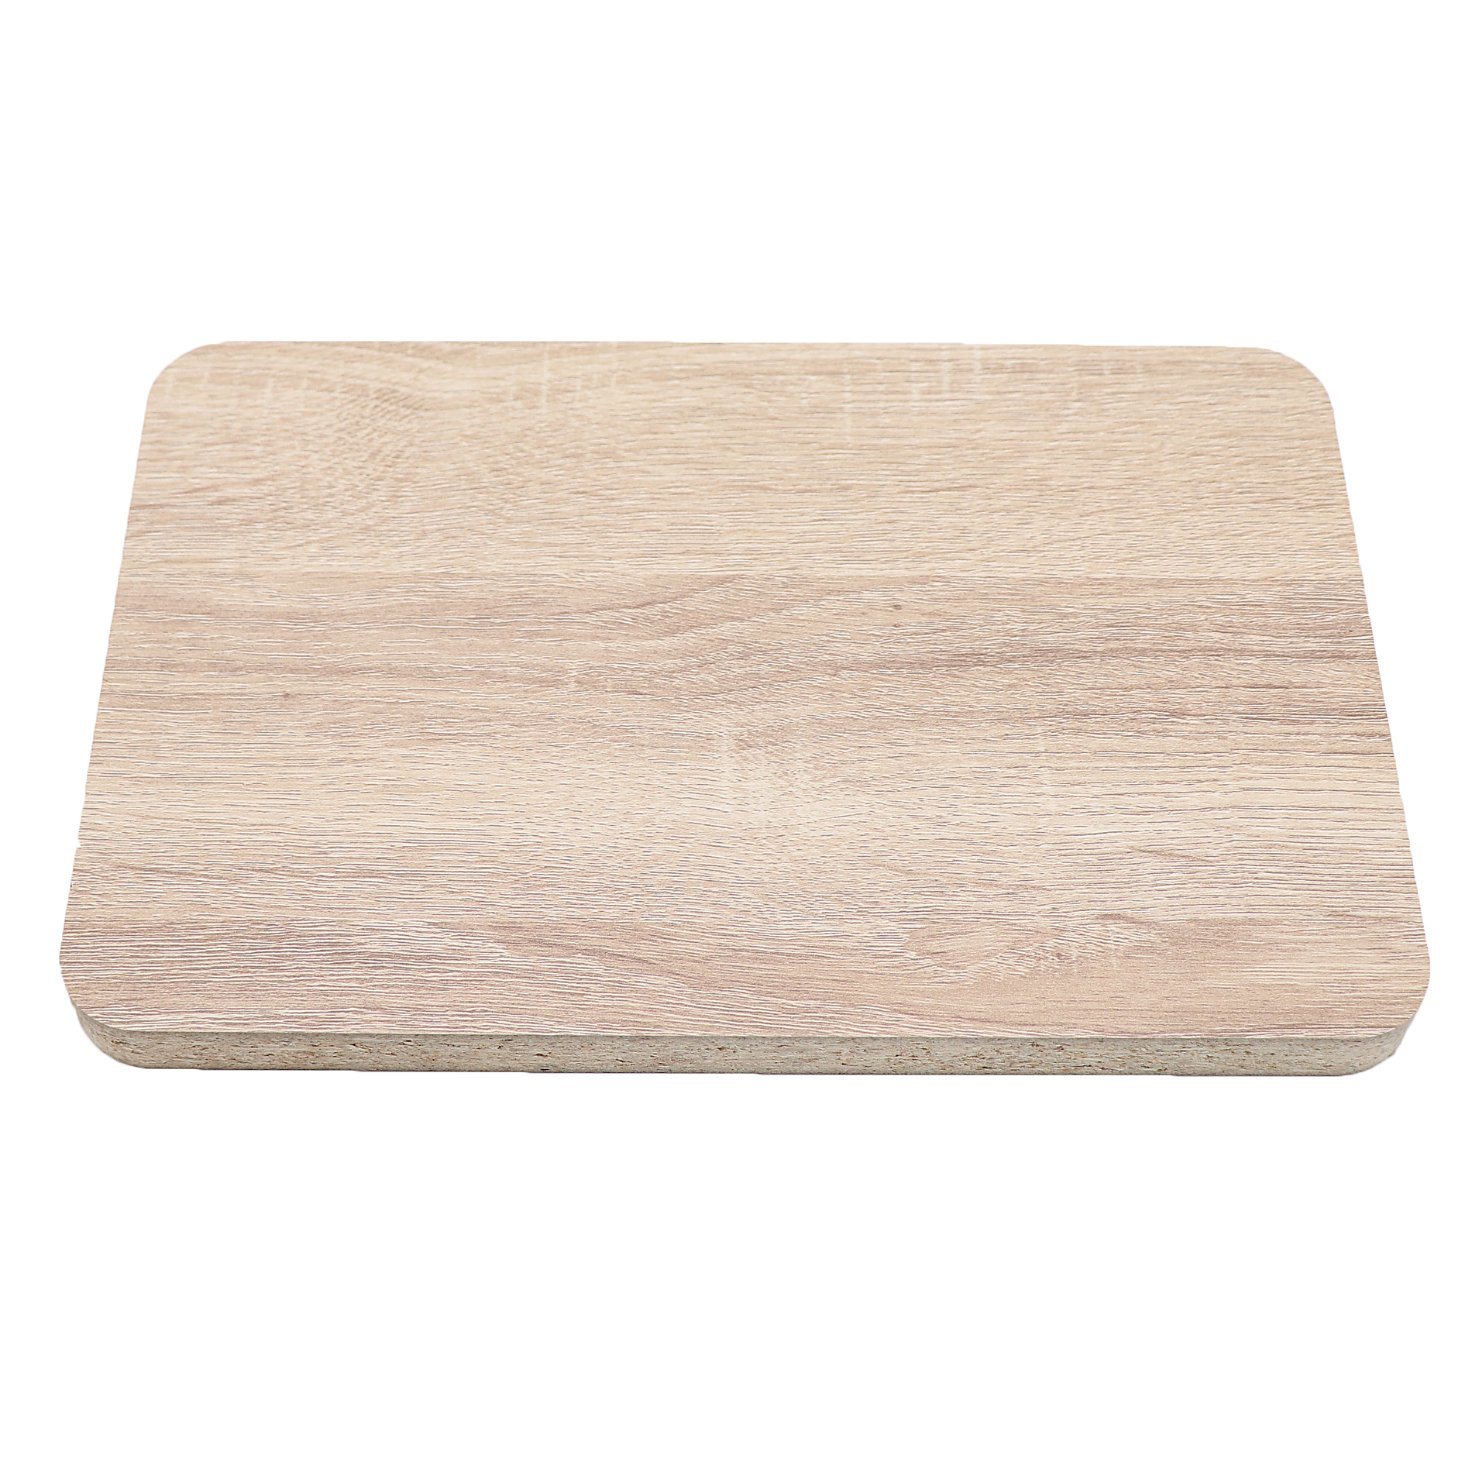 Wood Grain Coated Melamine Particle Board Fancy Particle Board for Home Decor